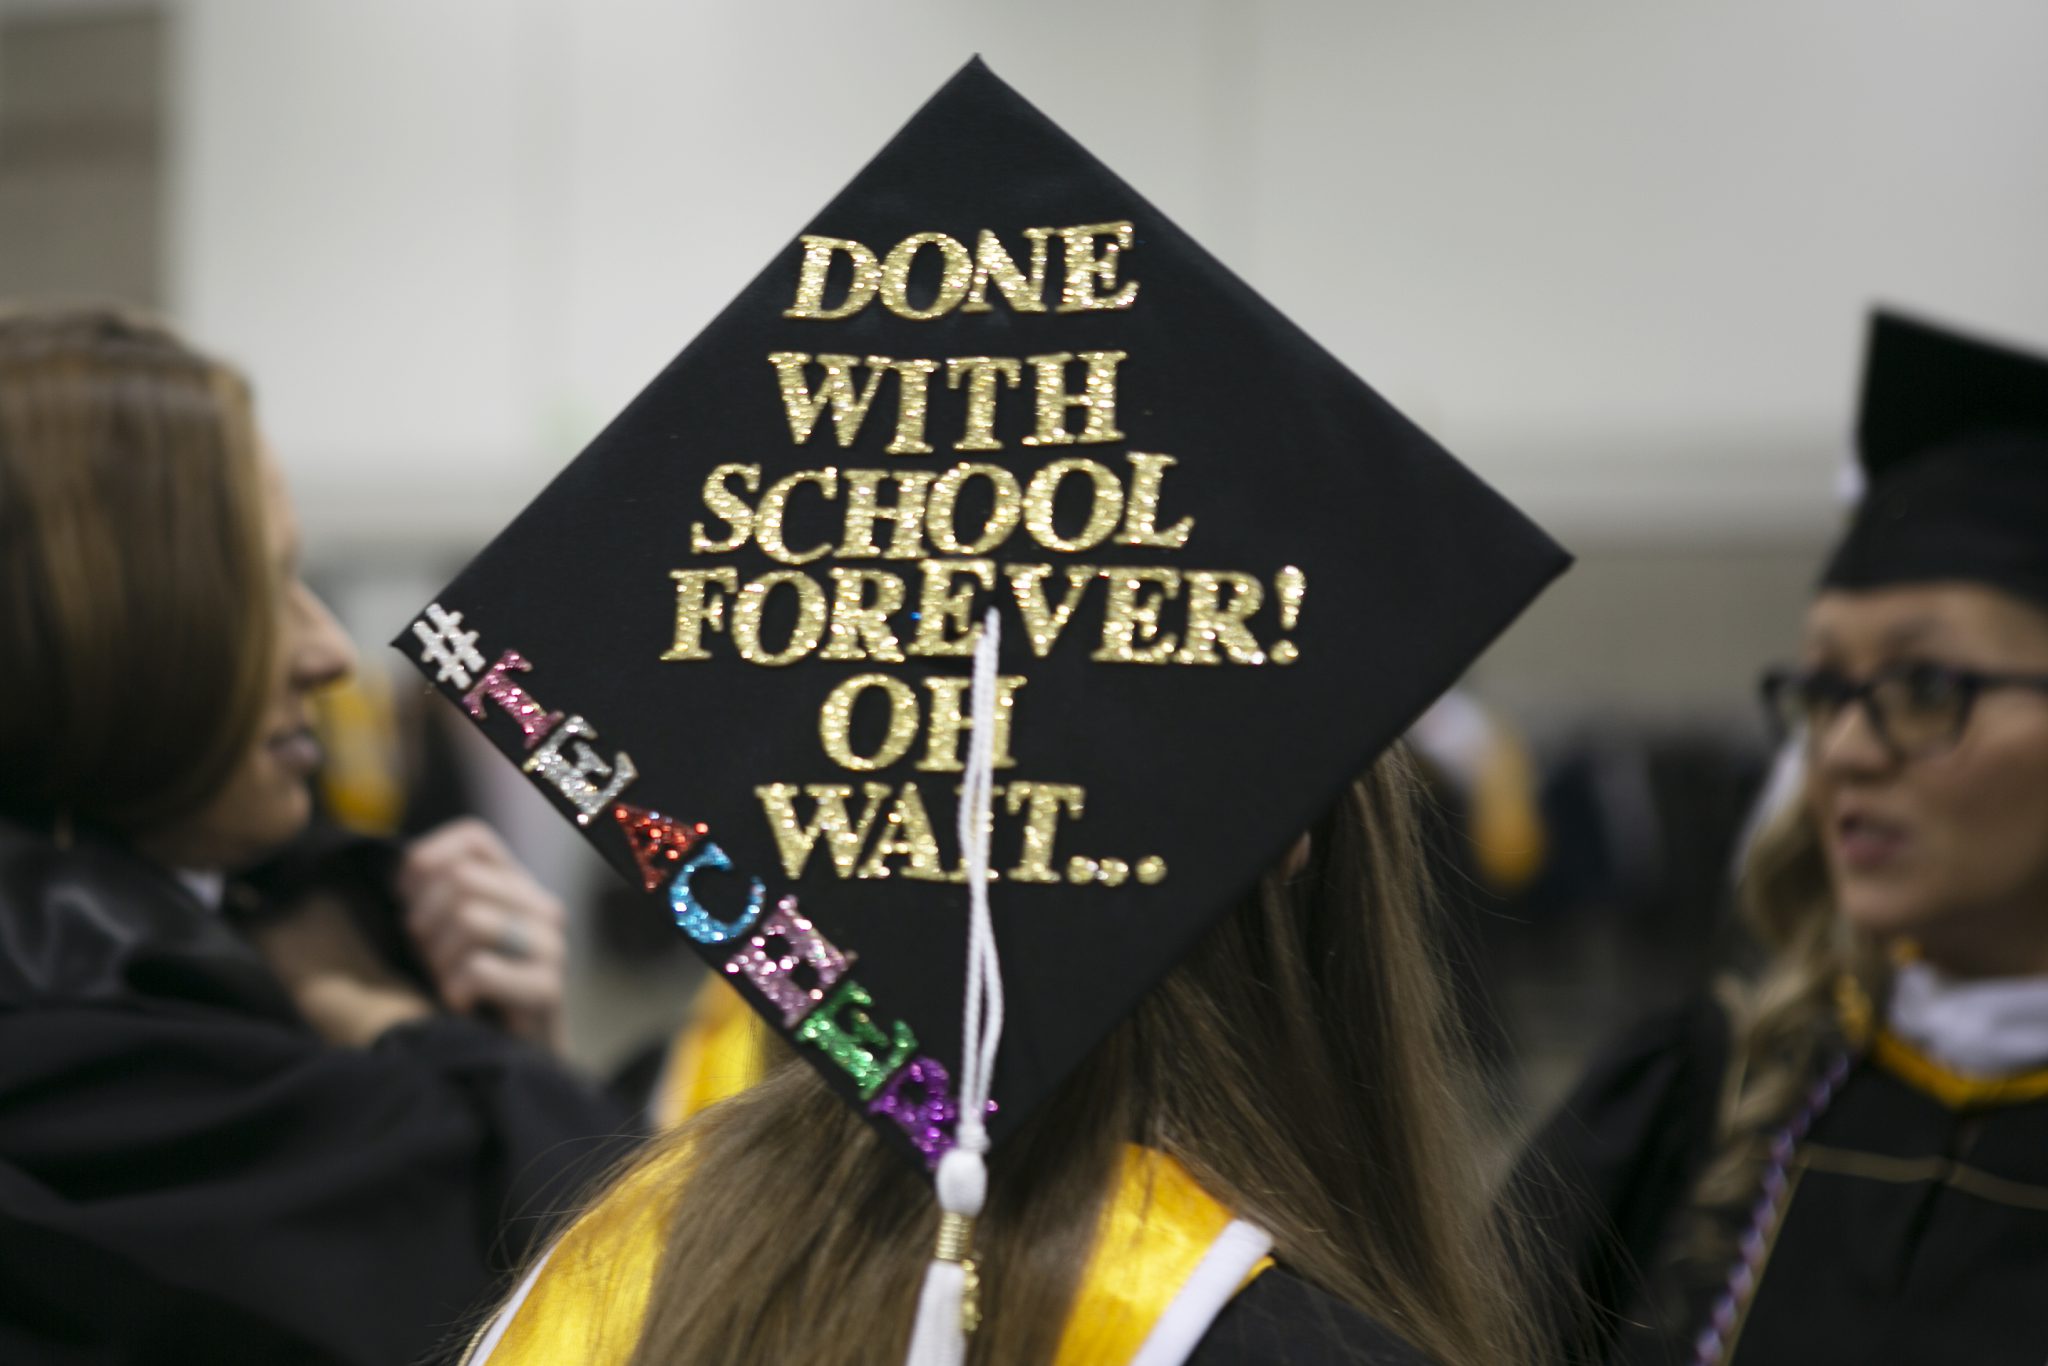 Student graduation cap that say "done with schoo forever! Oh wait...#teacher"